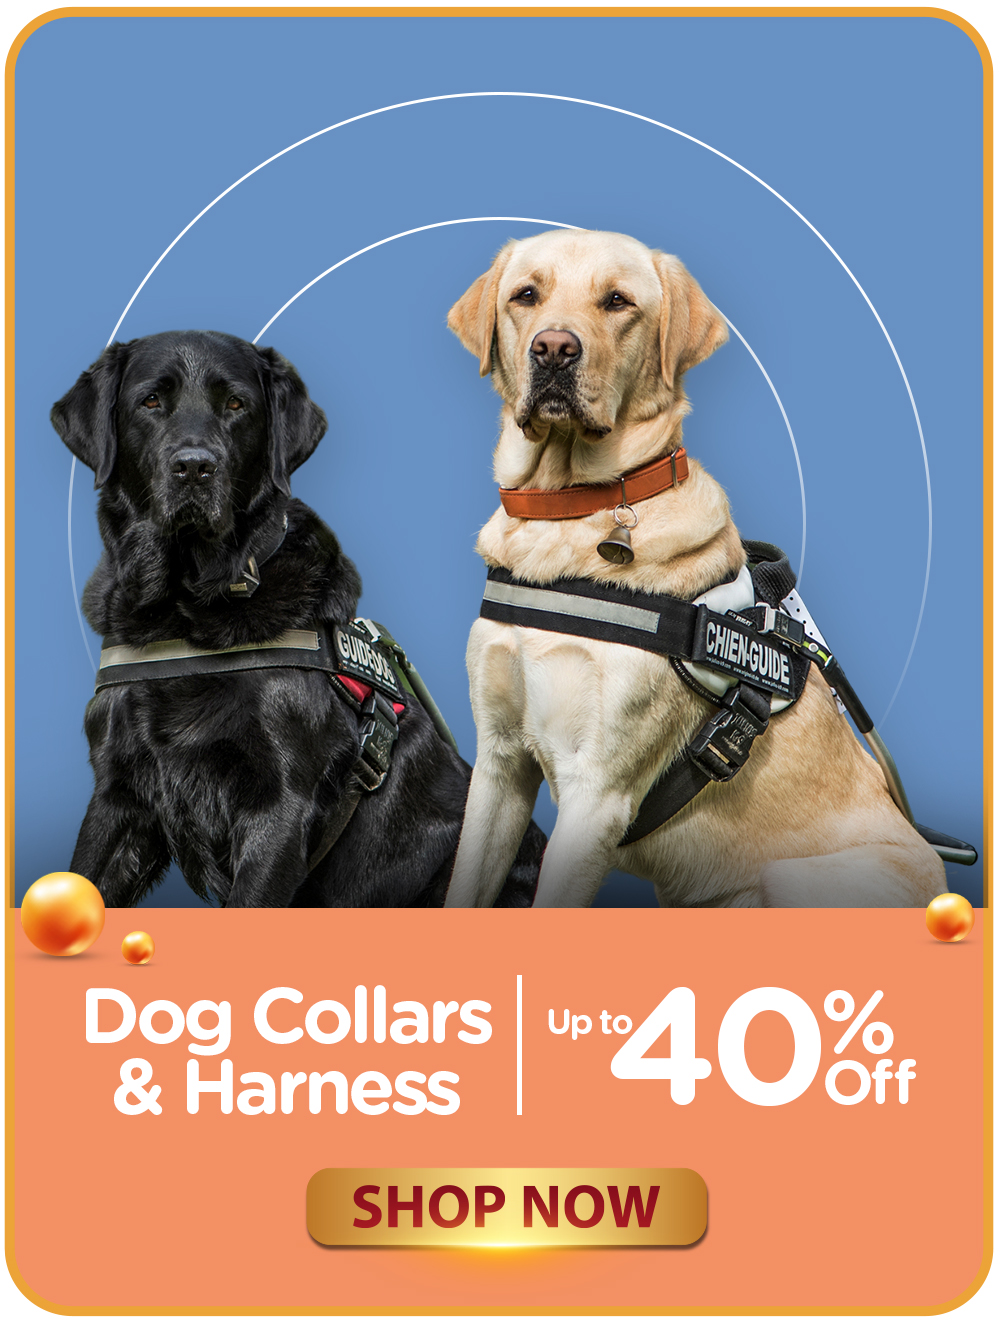 08 - CATEGORY BANNERS - DOG COLLARS AND HARNESS VER2